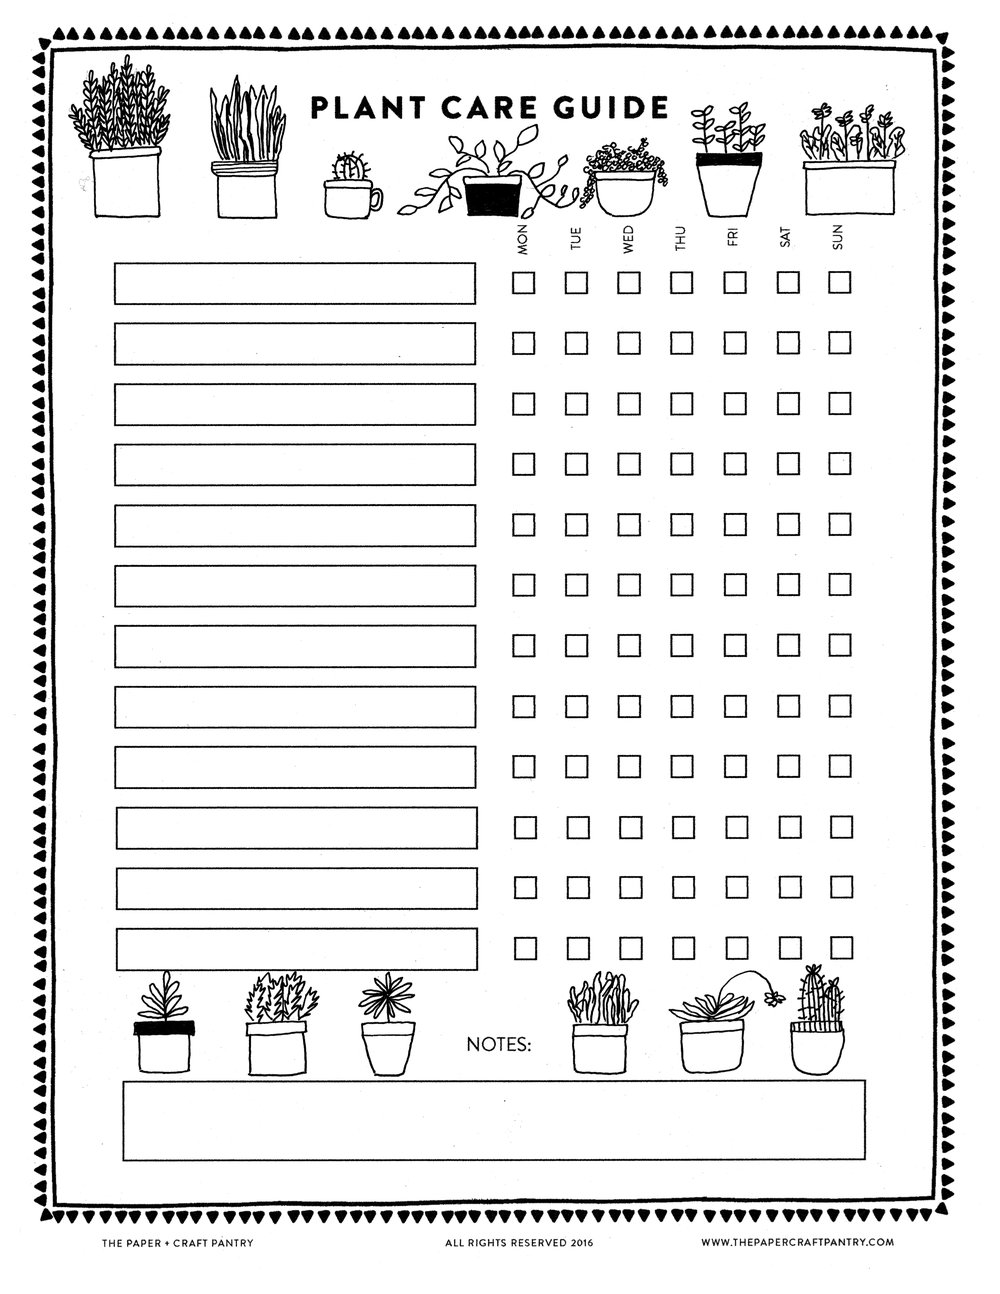 Printable Plant Care Guide — The Paper + Craft Pantry